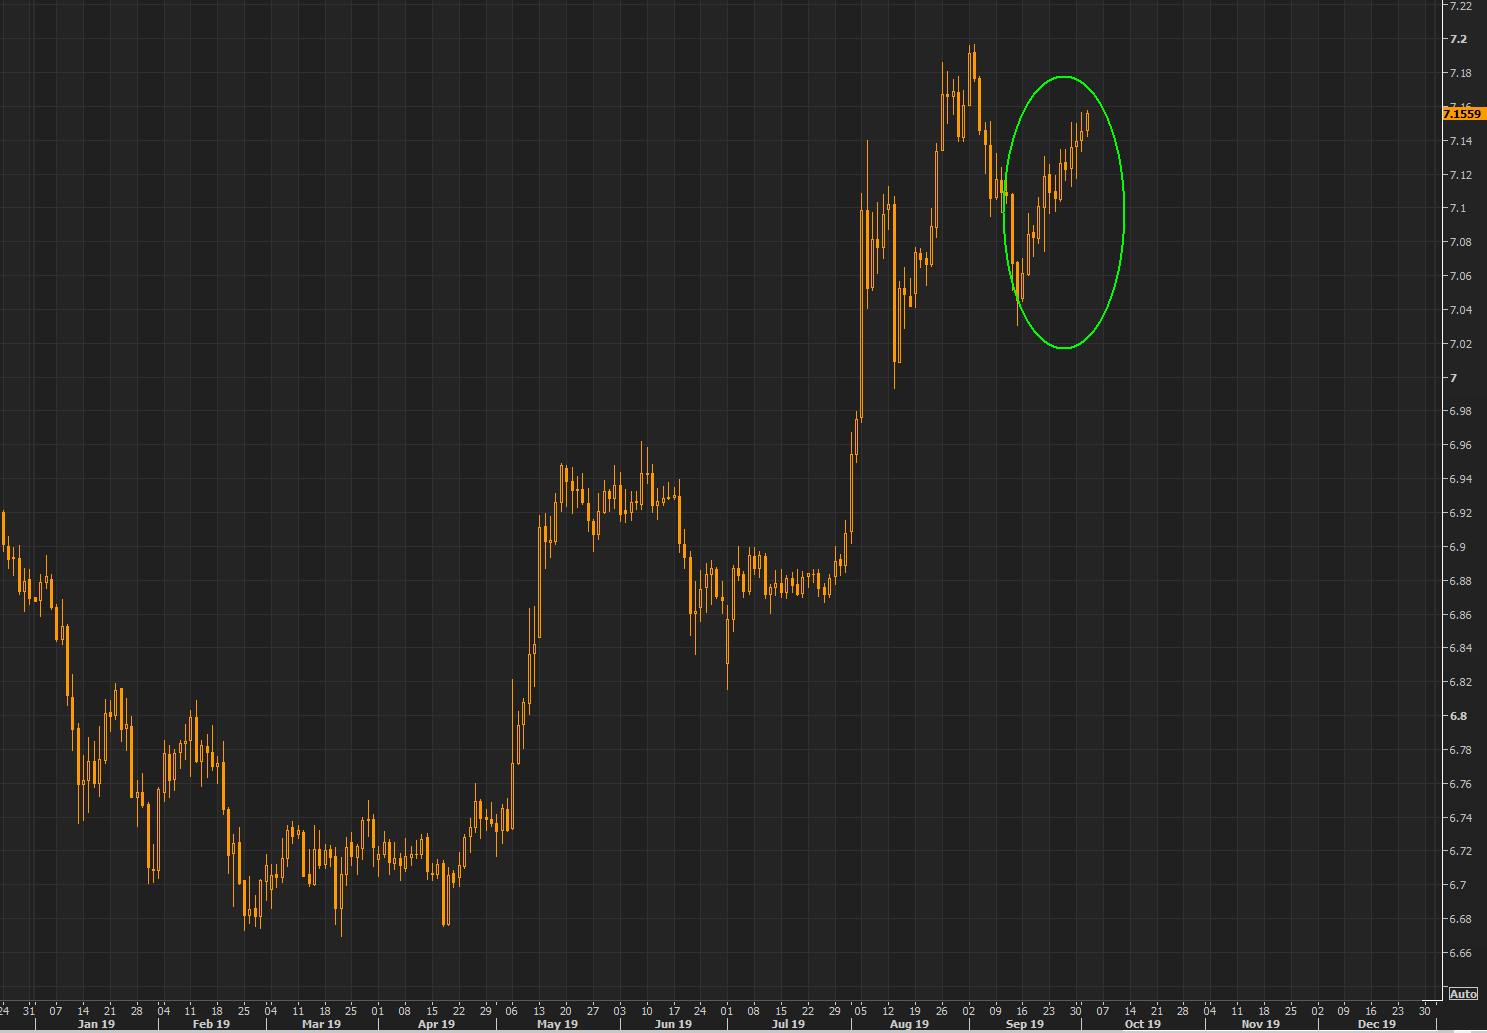 Not much noise, but the Yuan continues moving one way only